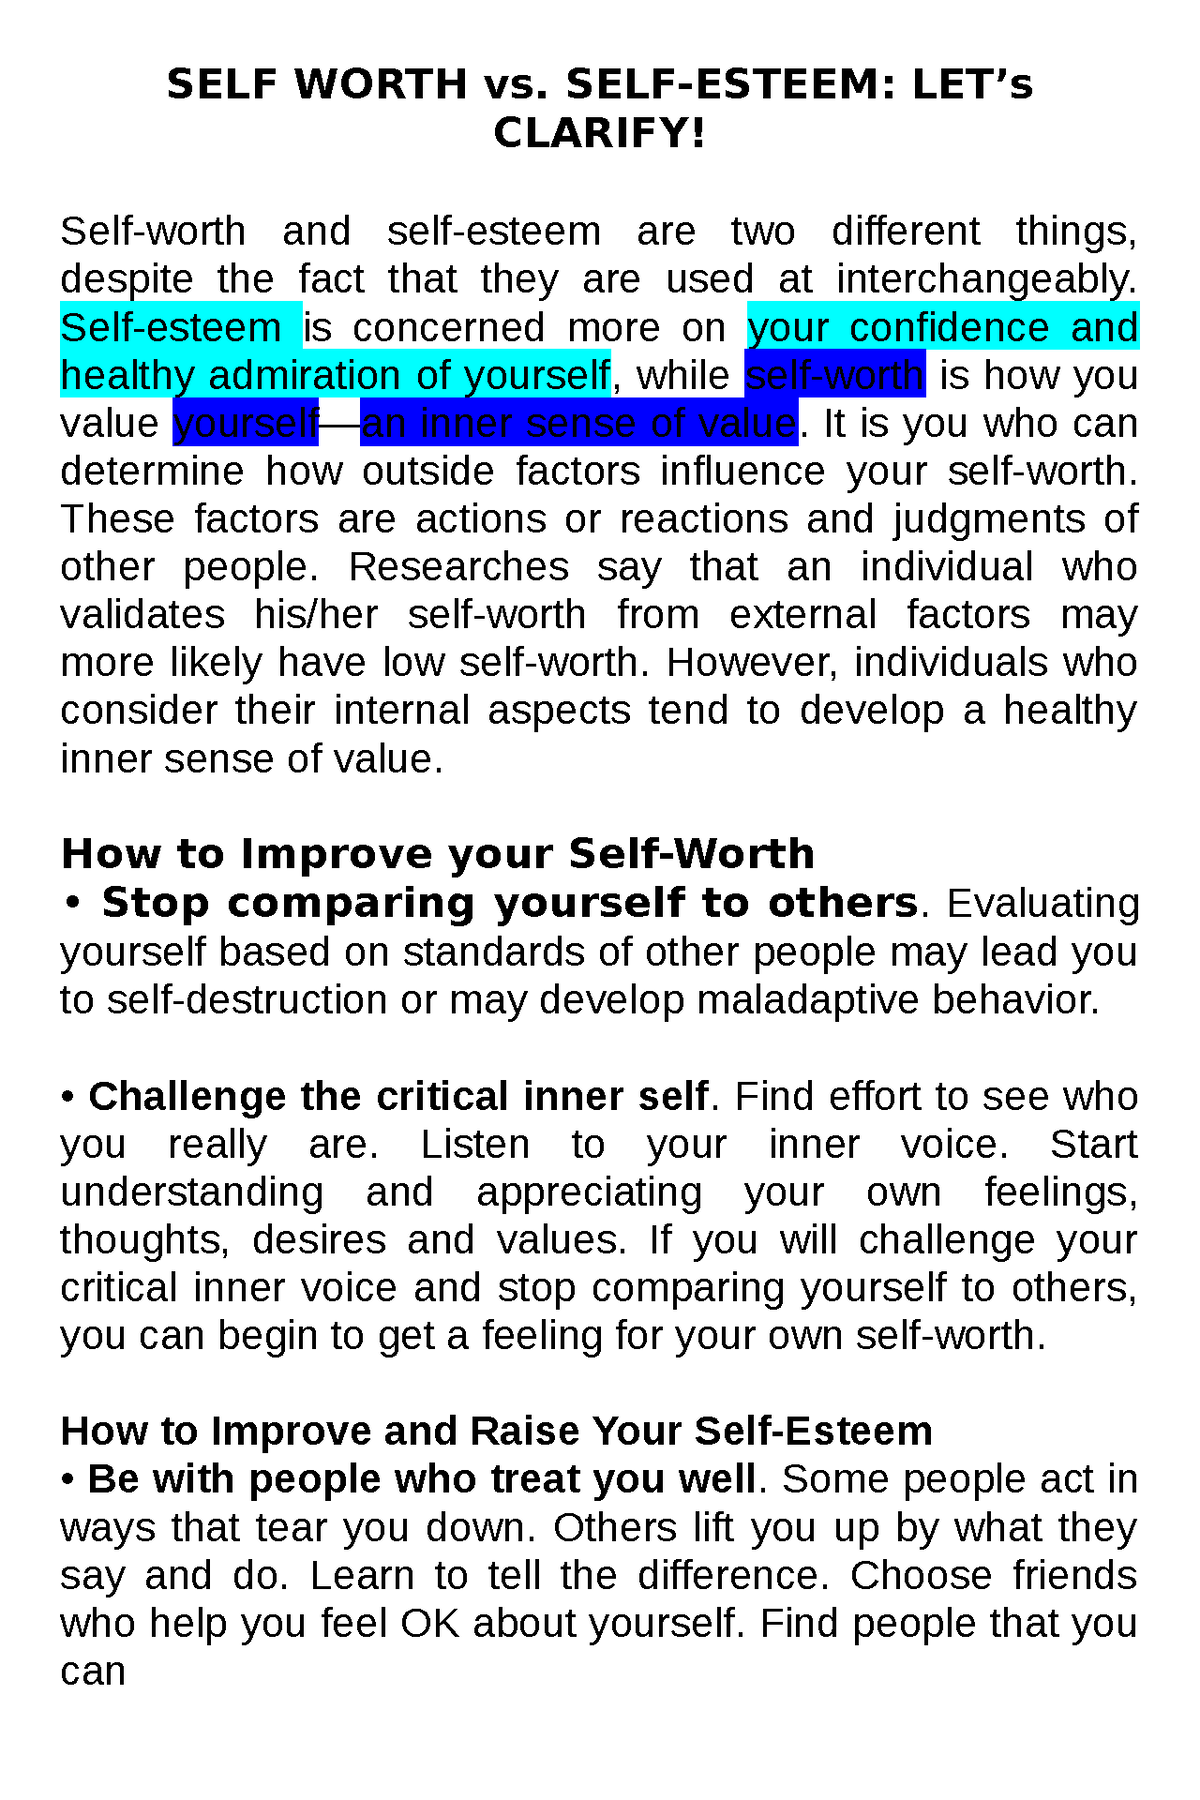 essay about self worth